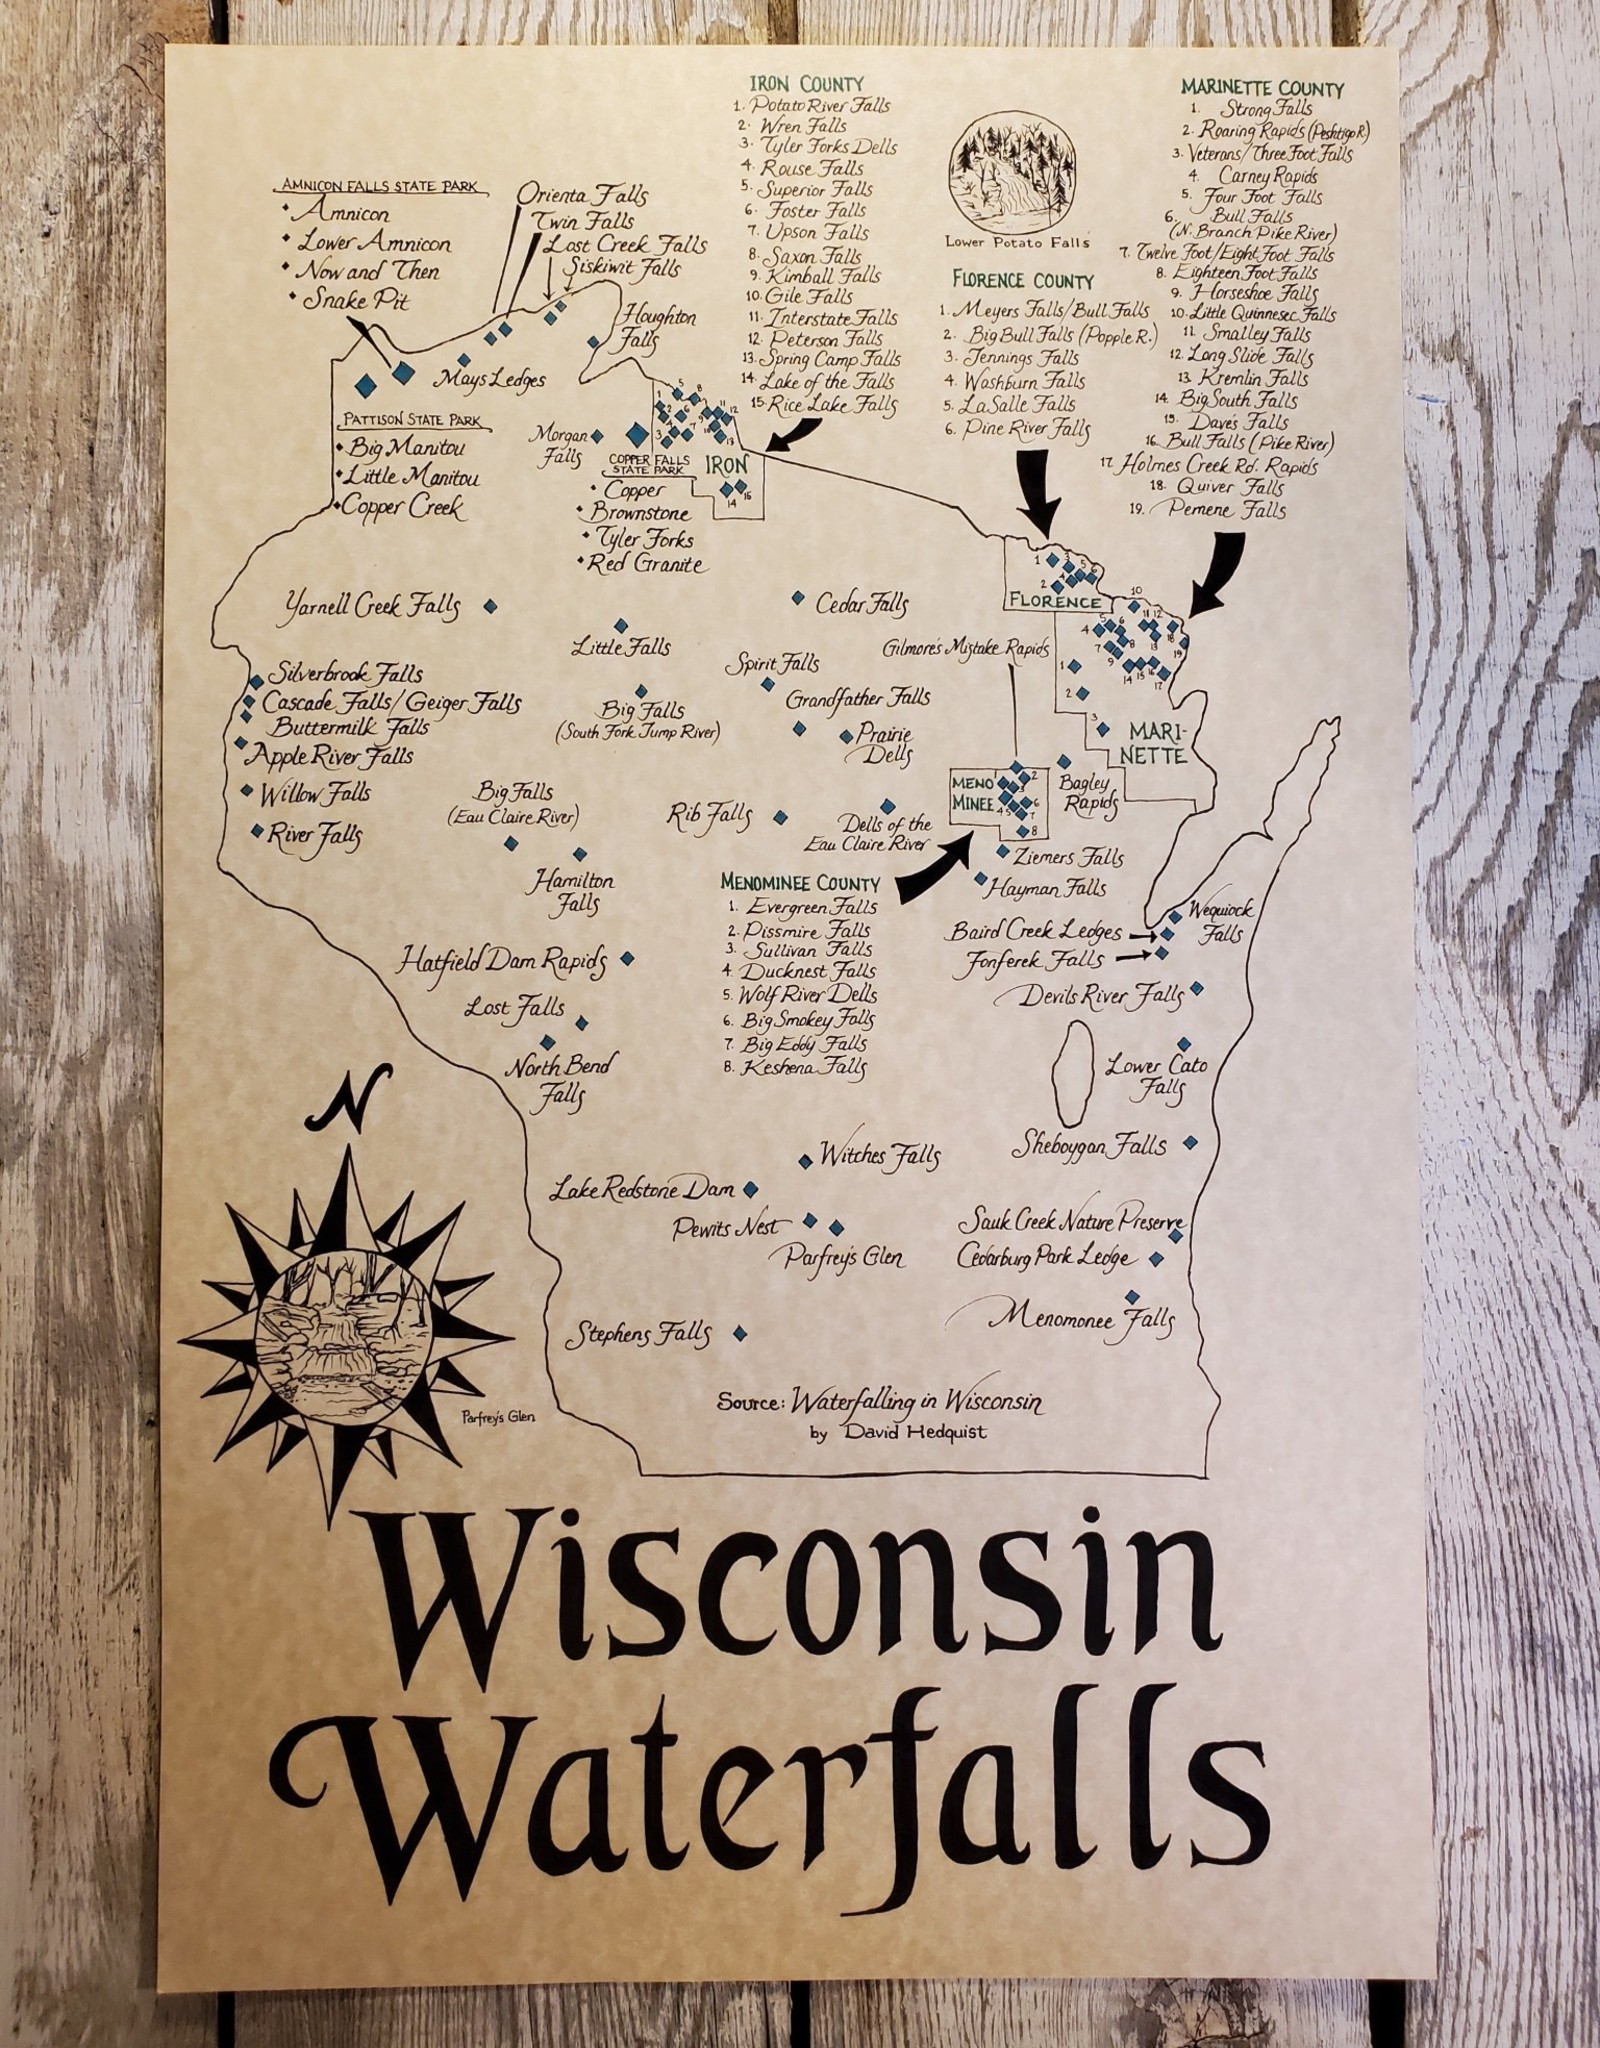 Mediaeval Mapmaker Wisconsin Waterfalls Hand Drawn Parchment Map